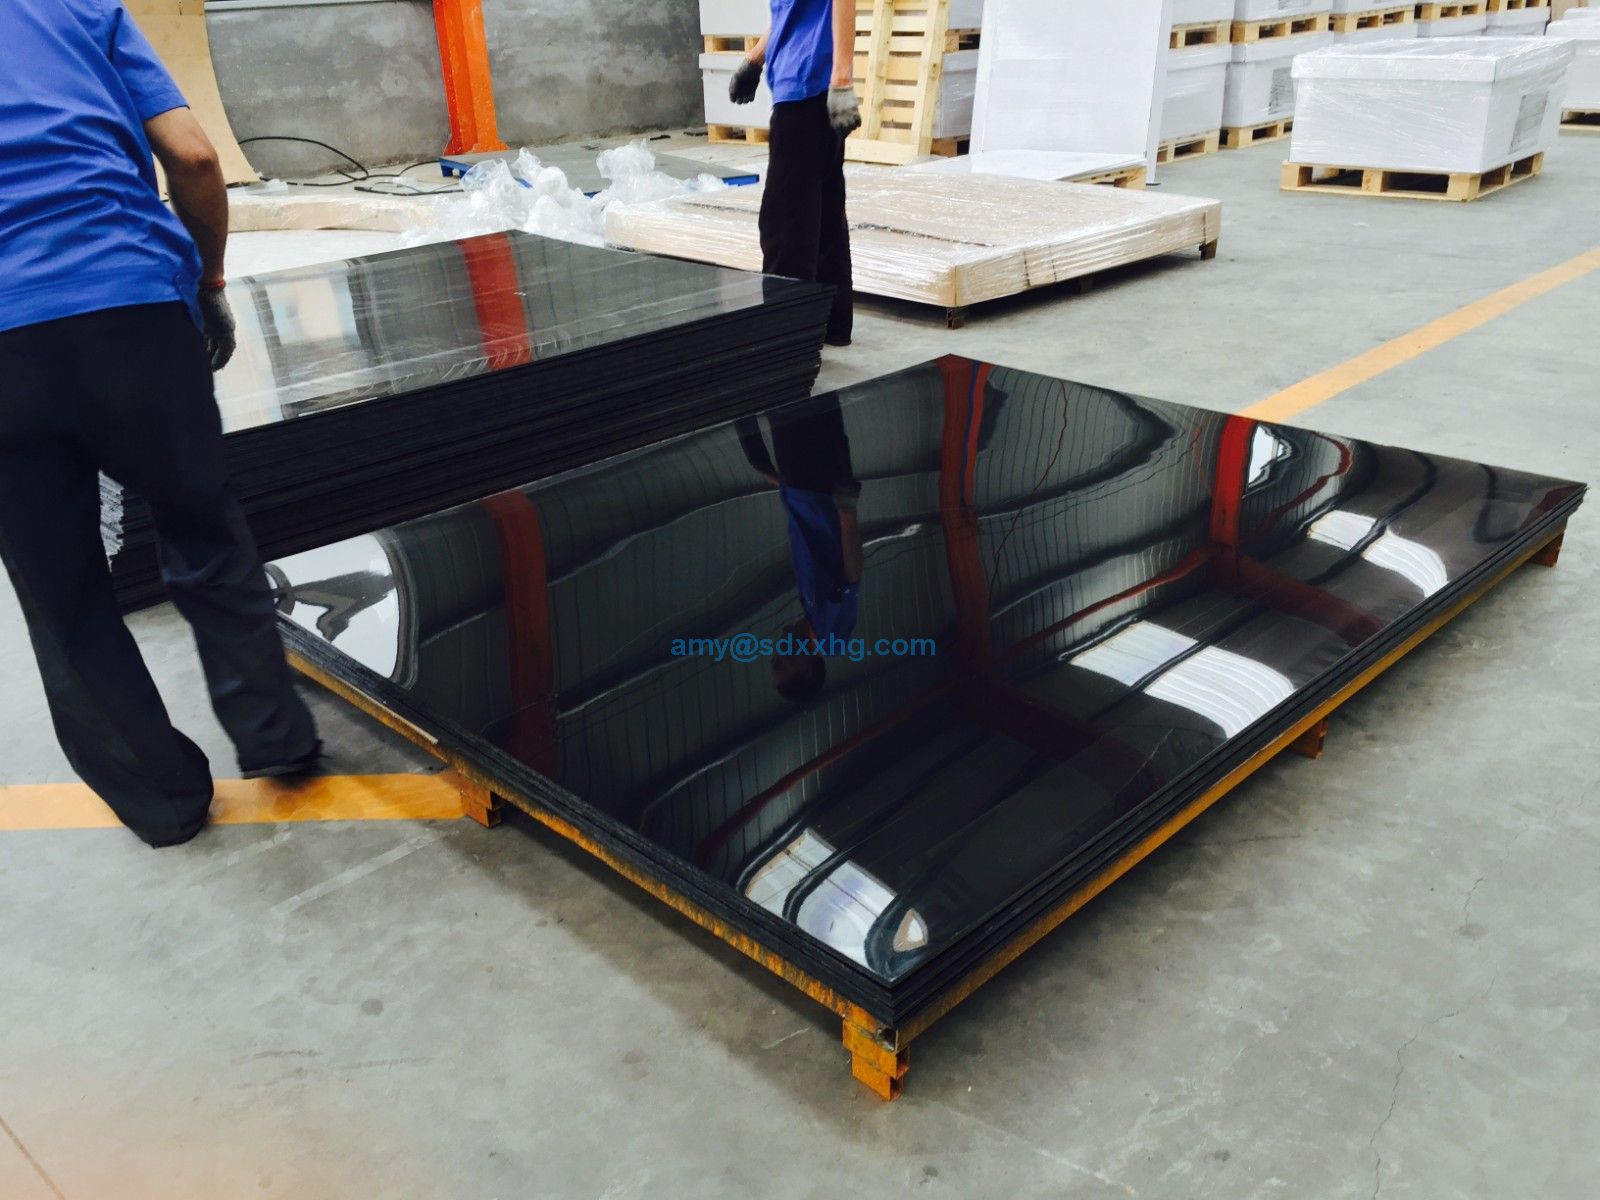 The Application of HDPE Marine StarBoard